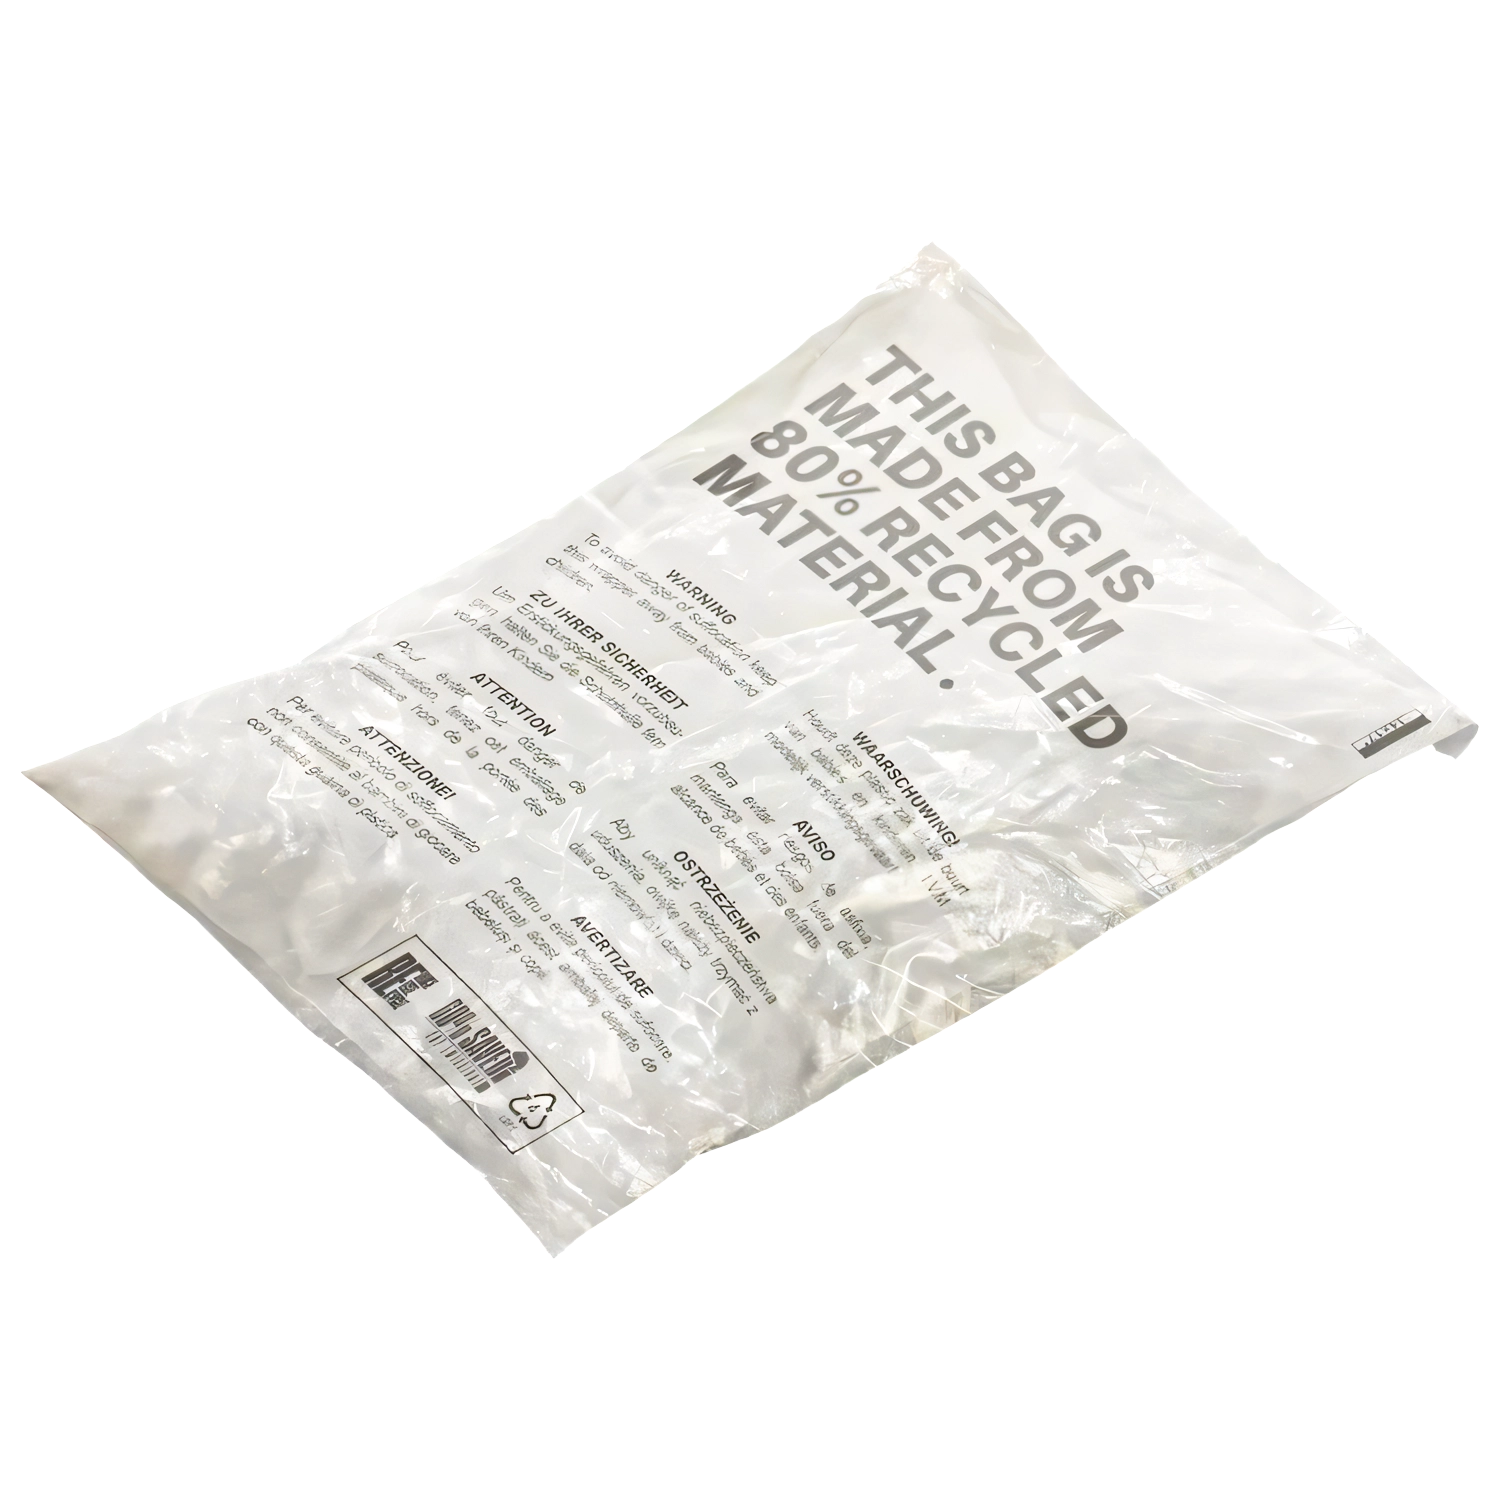 80% Recycled PIR LDPE Mailing Bags - Postal Bags 10x14 Inch